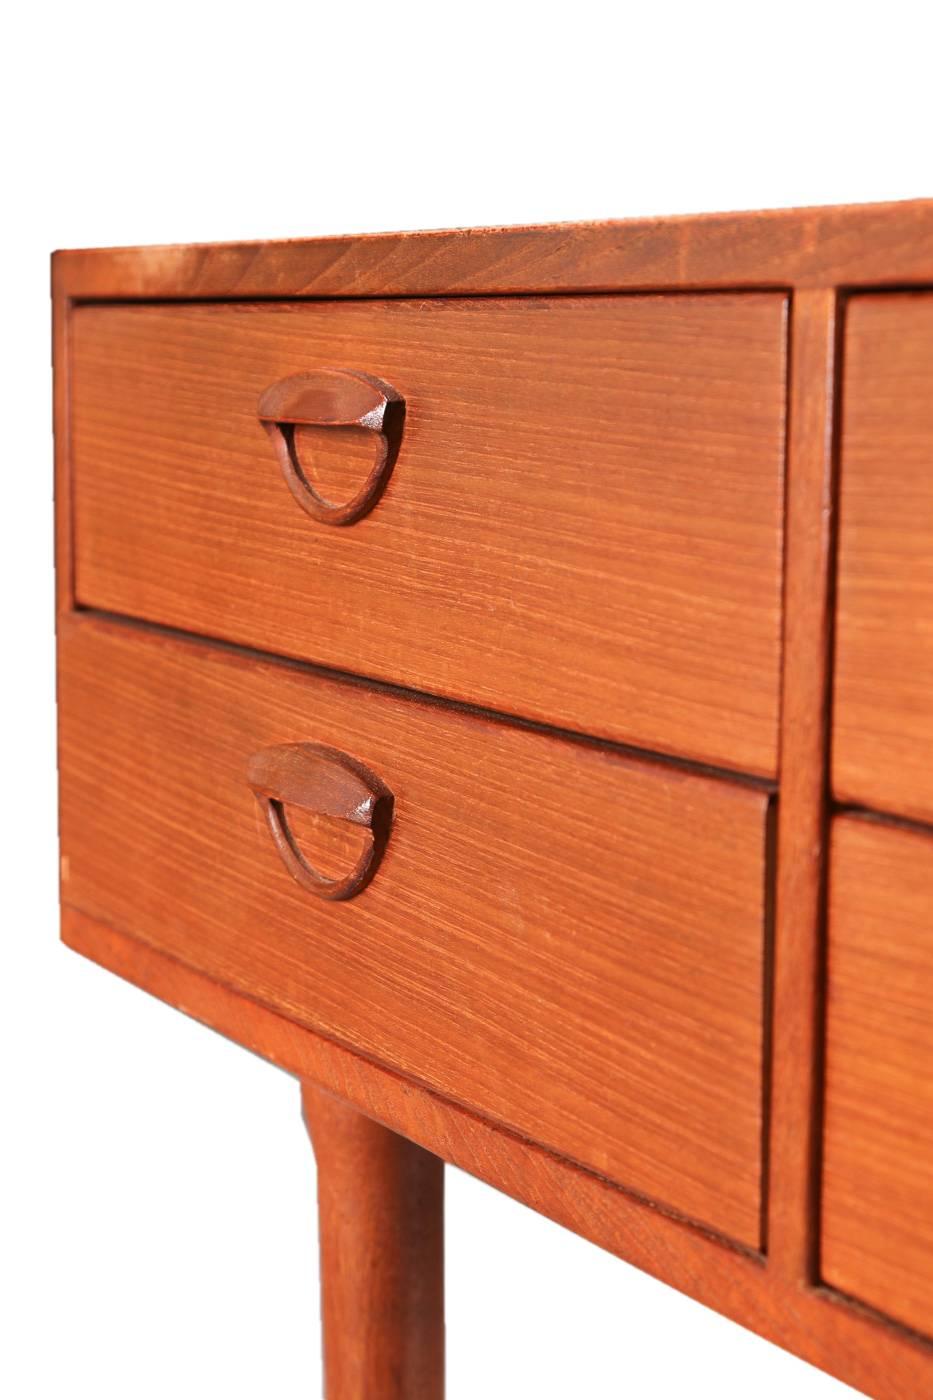 Small chest of drawers or entry console table, designed by Kai Kristiansen, produced by Feldballes Møbelfabrik in the 1960s. Features four drawers with organic handles. Made from wood with teak veneer top.